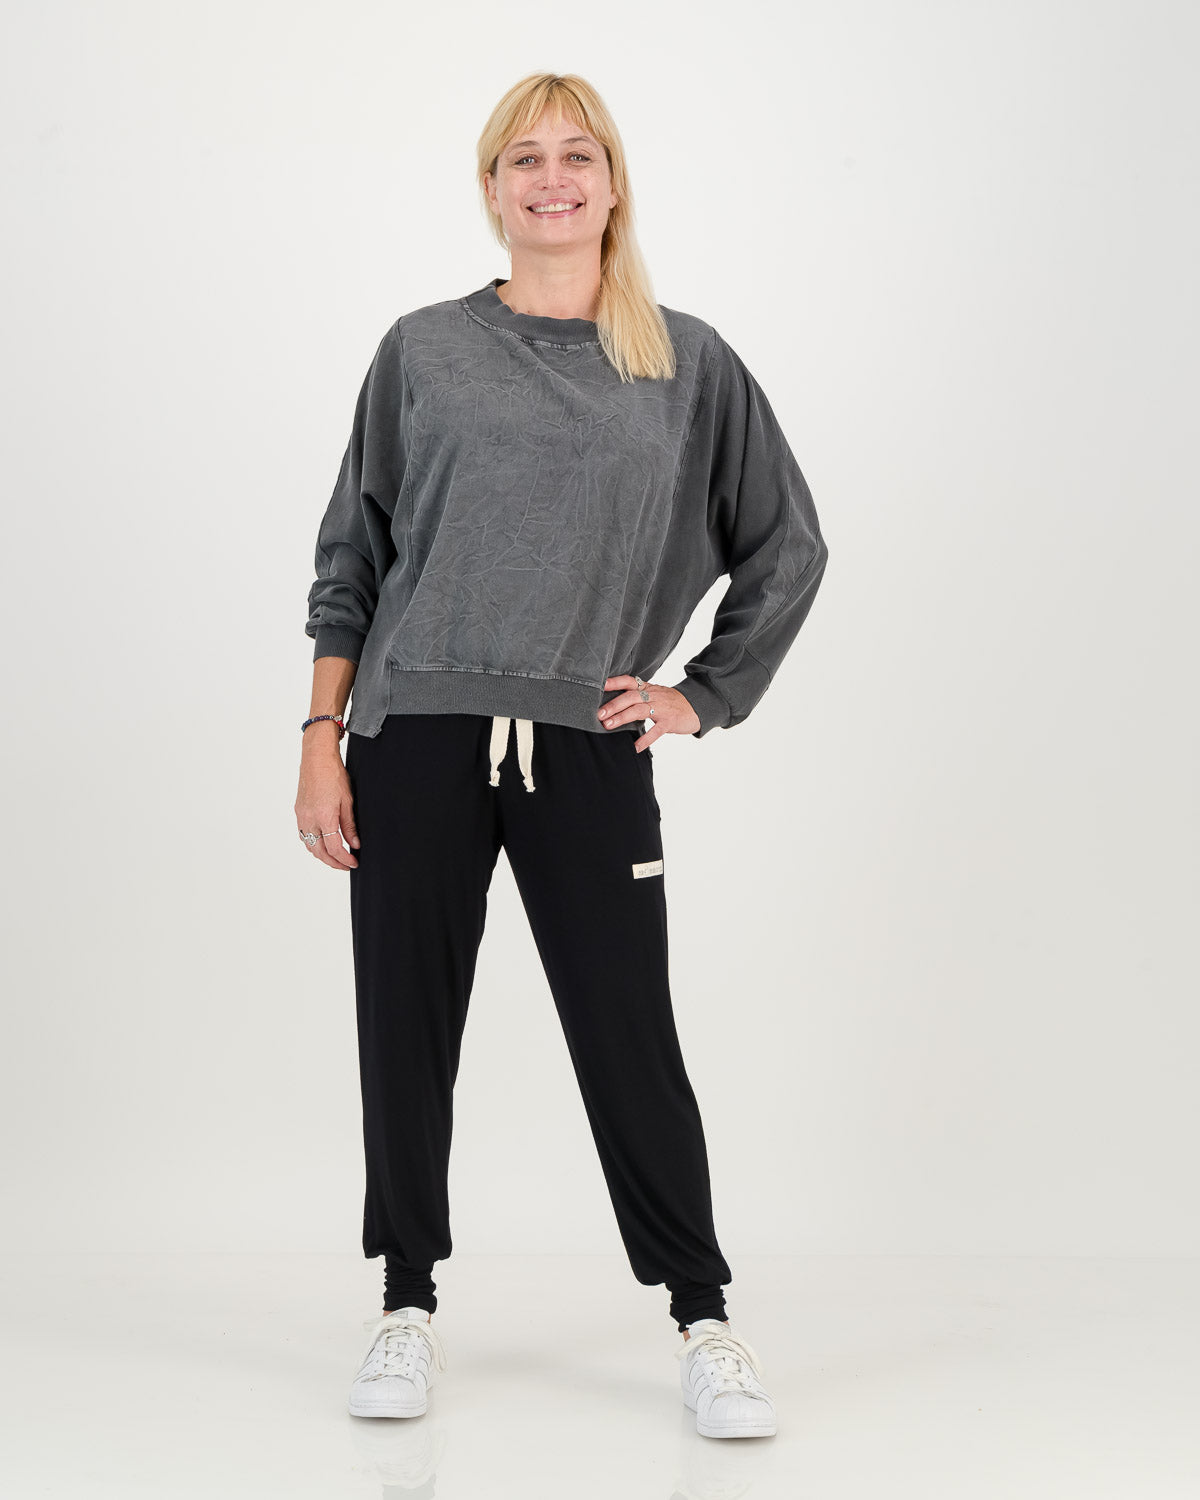 Batwing Overdyed Sweatshirt, charcoal color with black comfy pants